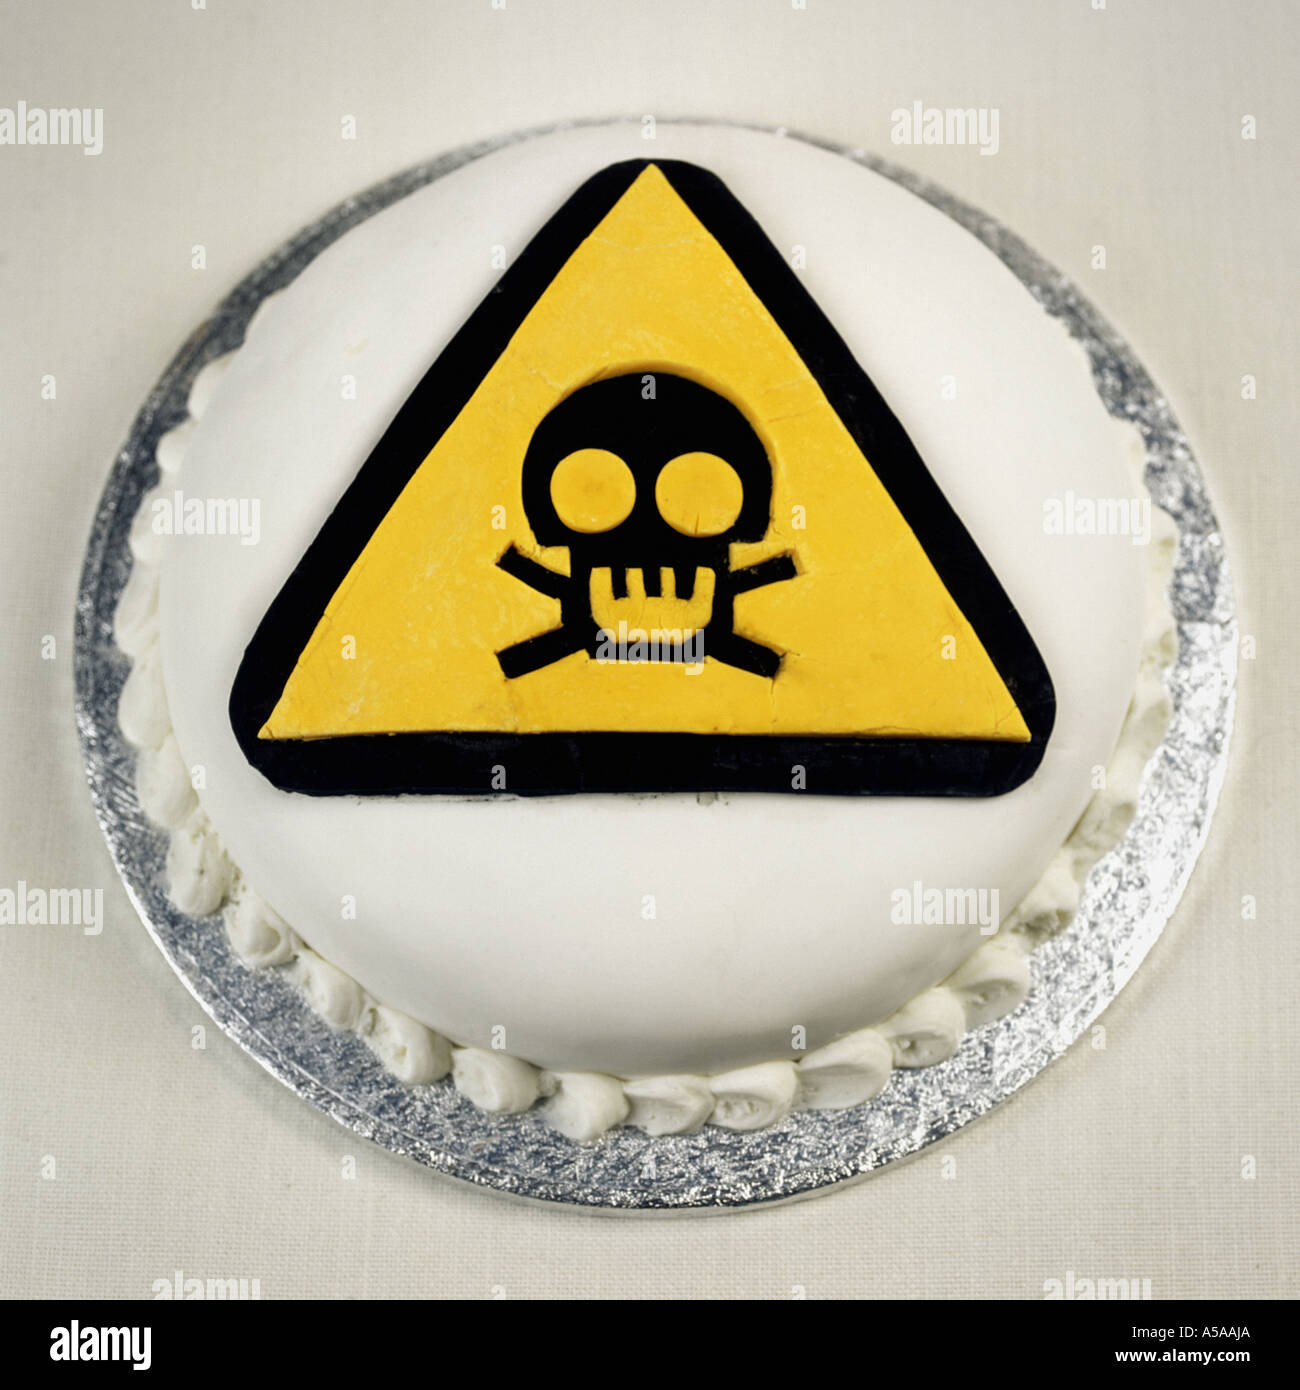 [Image: a-cake-with-a-poison-sign-made-from-icing-A5AAJA.jpg]